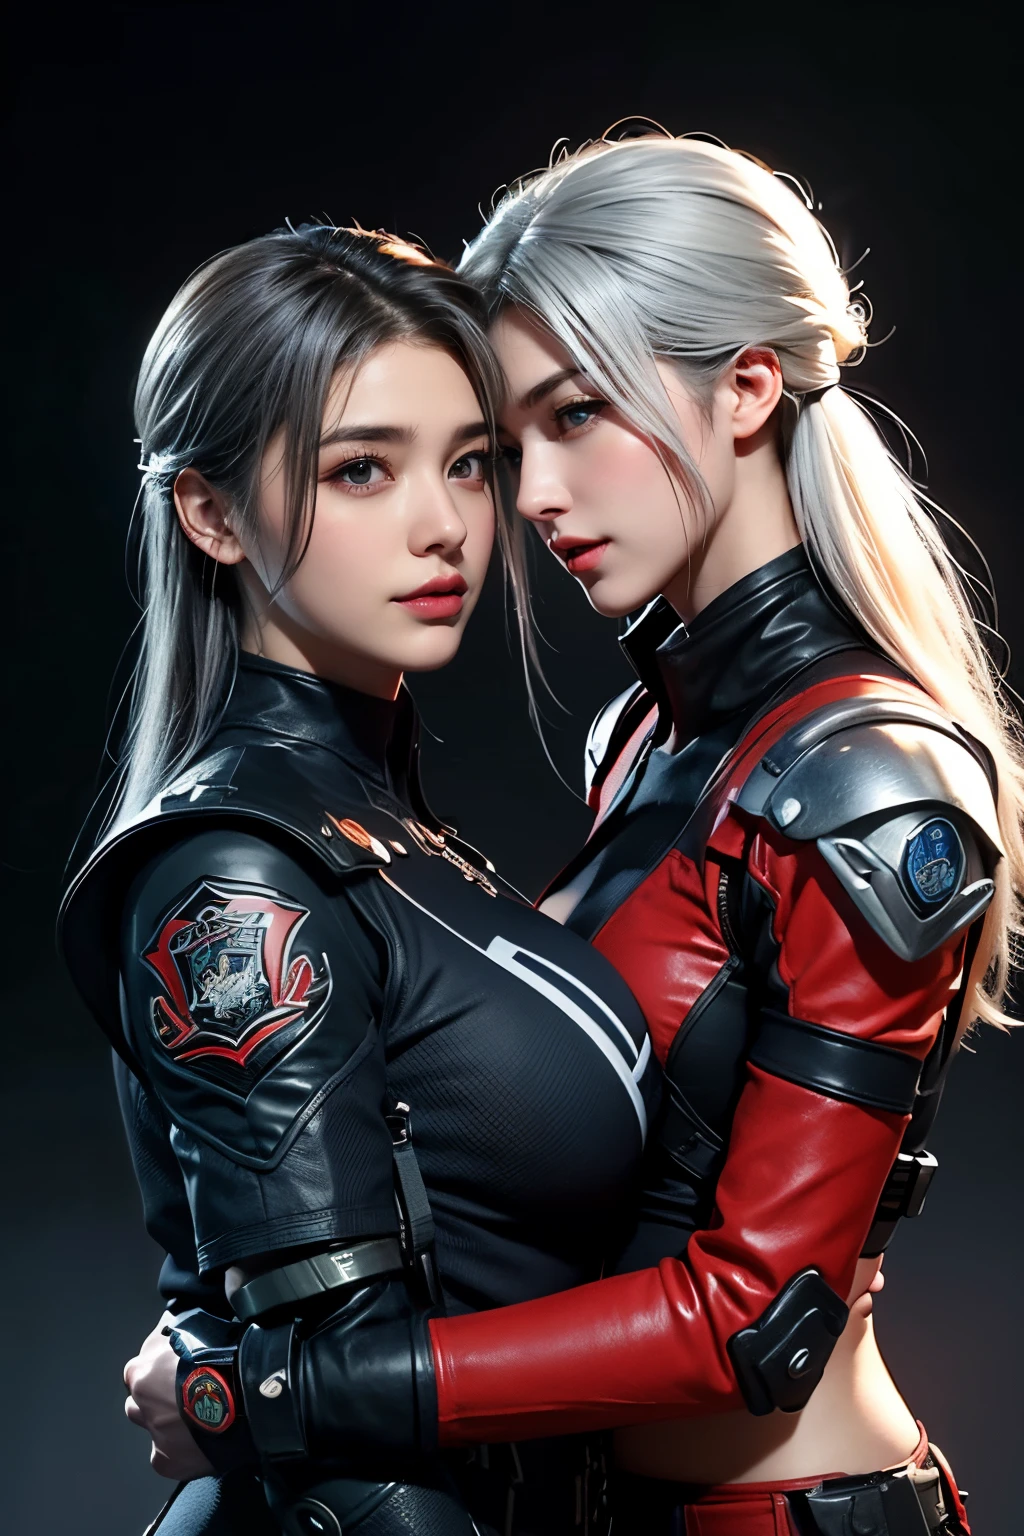 high high quality,A high resolution,masterpiece,8K,(Hyperrealistic photos),(Portrait),digital photography,(Reality:1.4),Two girls hugging and kissing each other,exquisite facial features,a purple eye,Red Eyeshadow,((Two hugging and kissing girls)),Random hairstyles,(white color hair),Big breasts,(Sci-fi and realistic police uniforms,Combat uniforms,Openwork design,power armour,Metal shoulder pads,complex clothing patterns,Exquisite police badge),Keep your mouth shut,elegant and charming,Smile shyly,extremely detailed expression,realistic detail,Light magic,hugs,kiss,oc render reflection texture